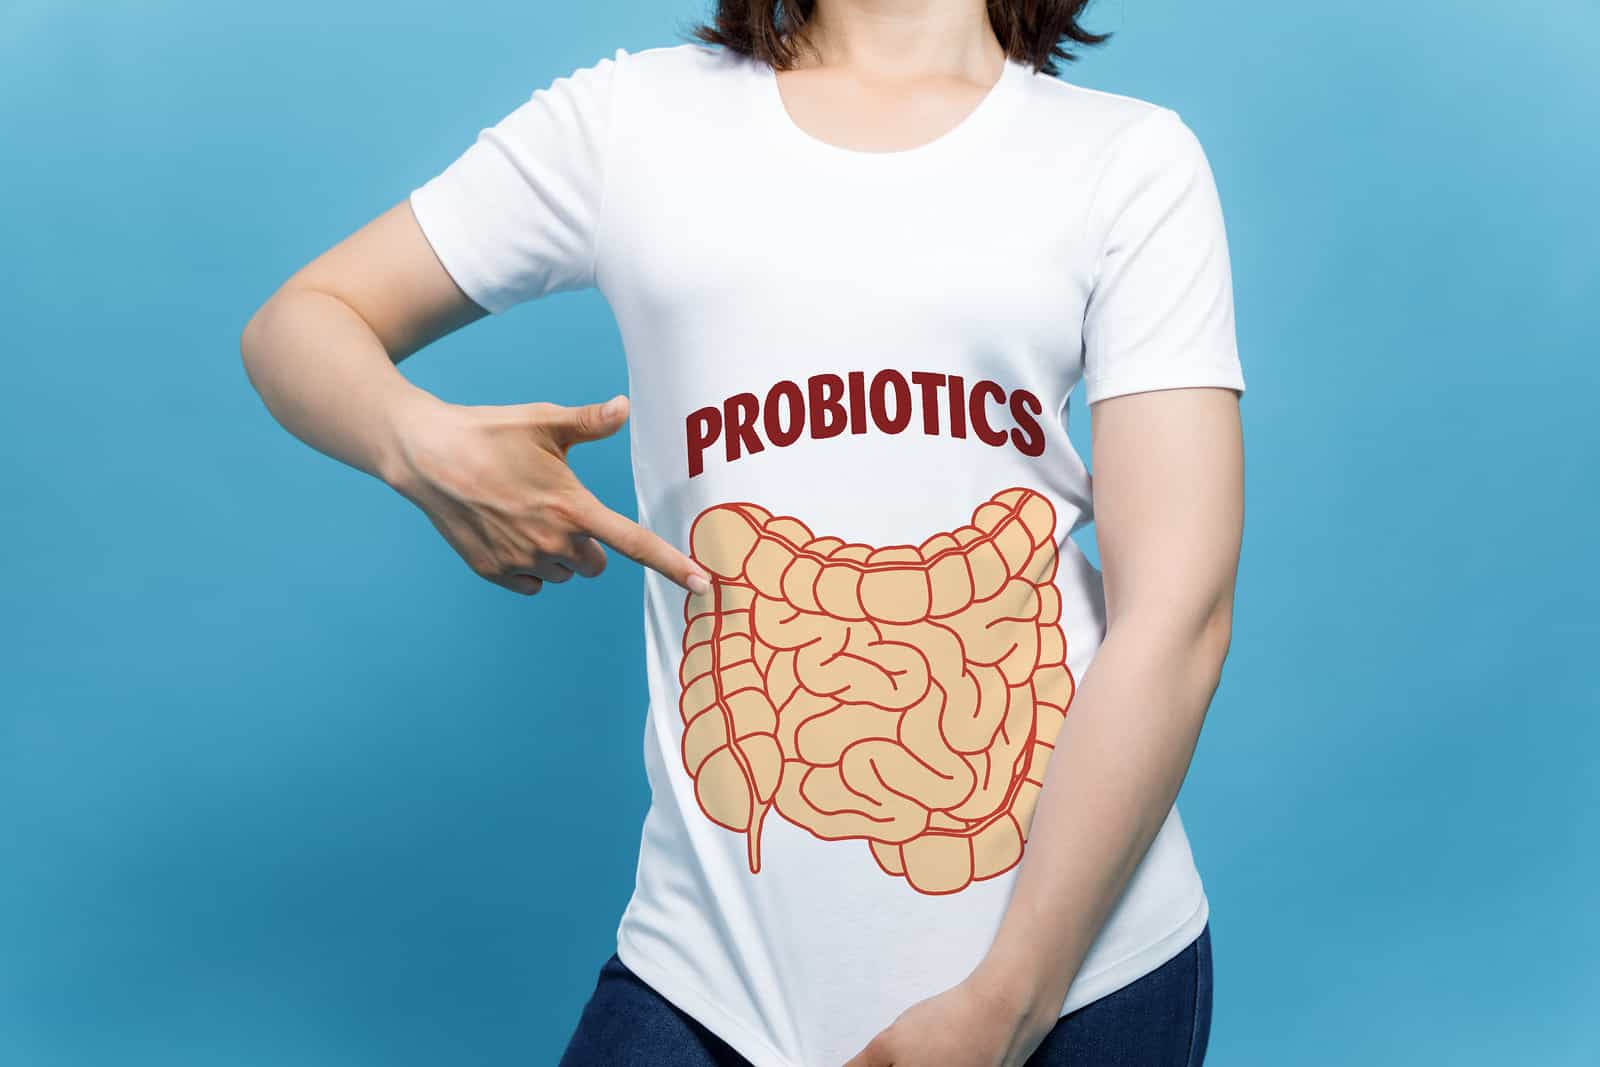 best probiotic for IBS: Woman pointing to the illustration of an intestine on her shirt